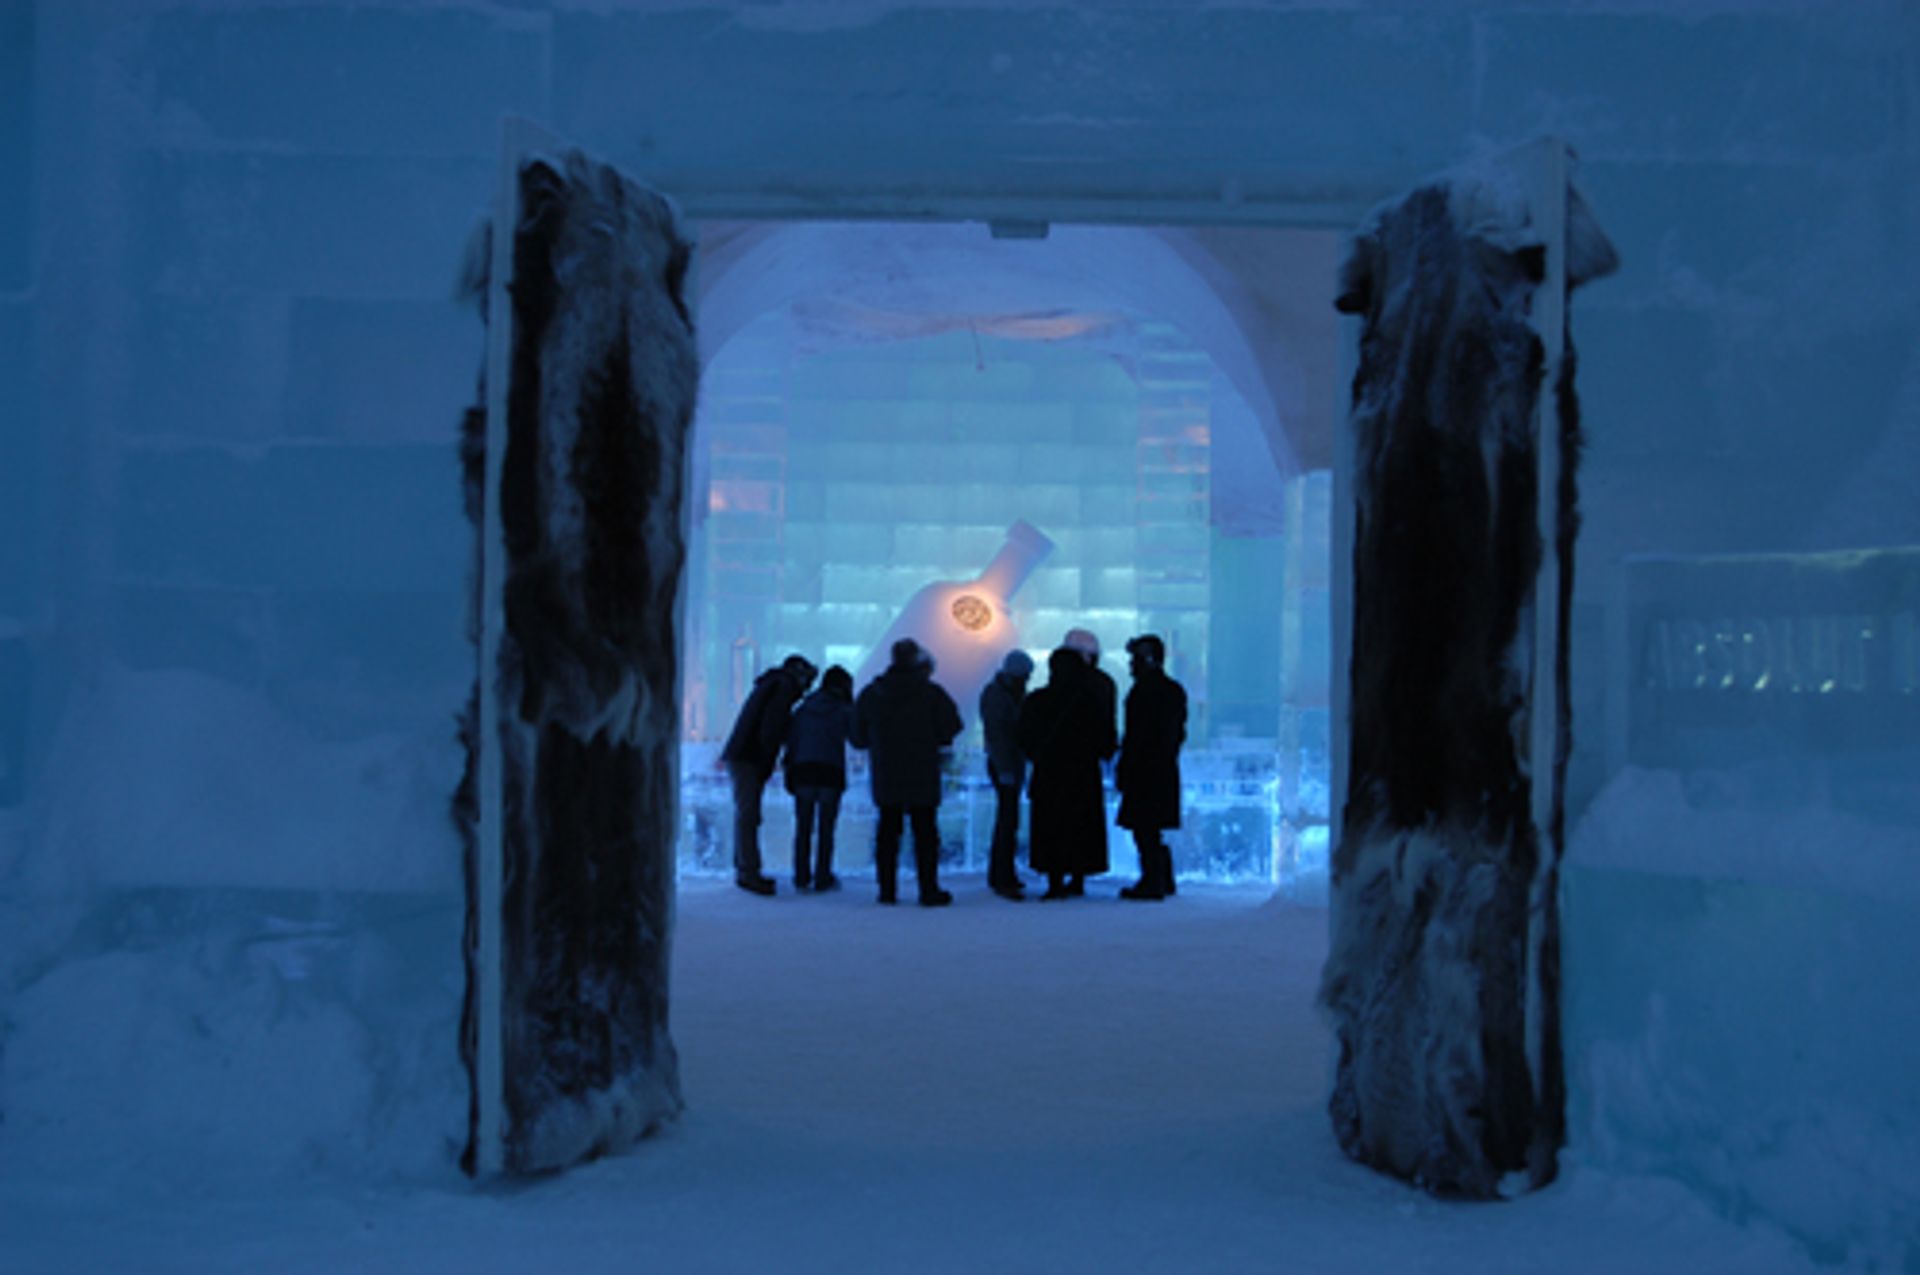 A group of people stand inside the Ice Hotel.